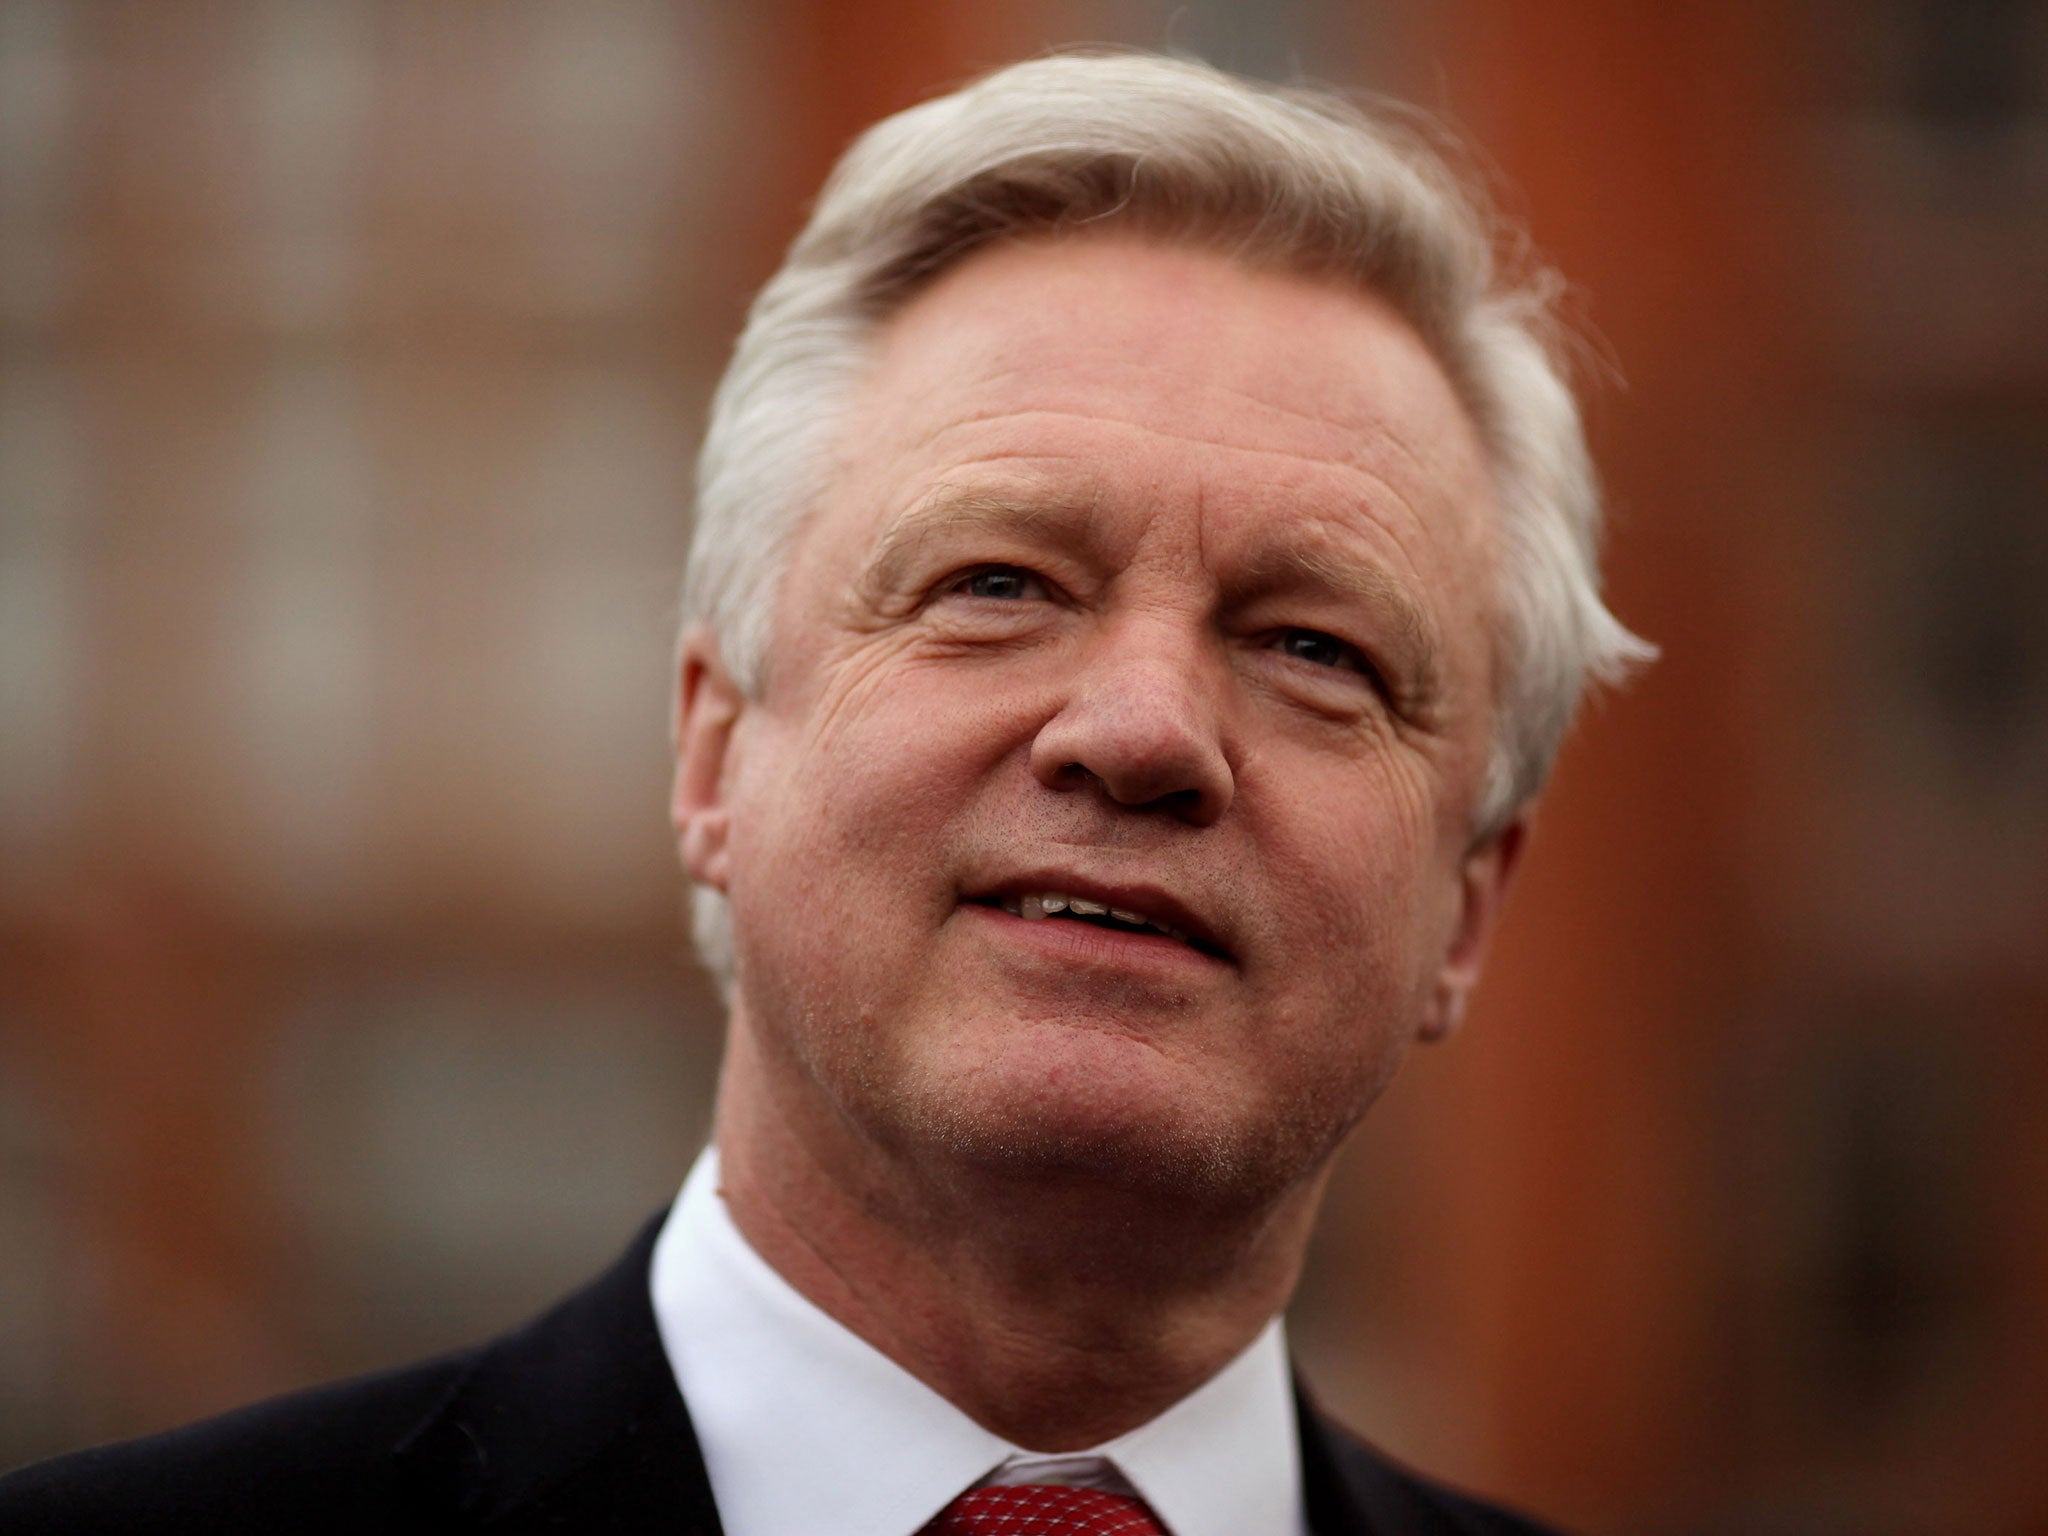 David Davis argues leaving the EU would help the UK police its borders